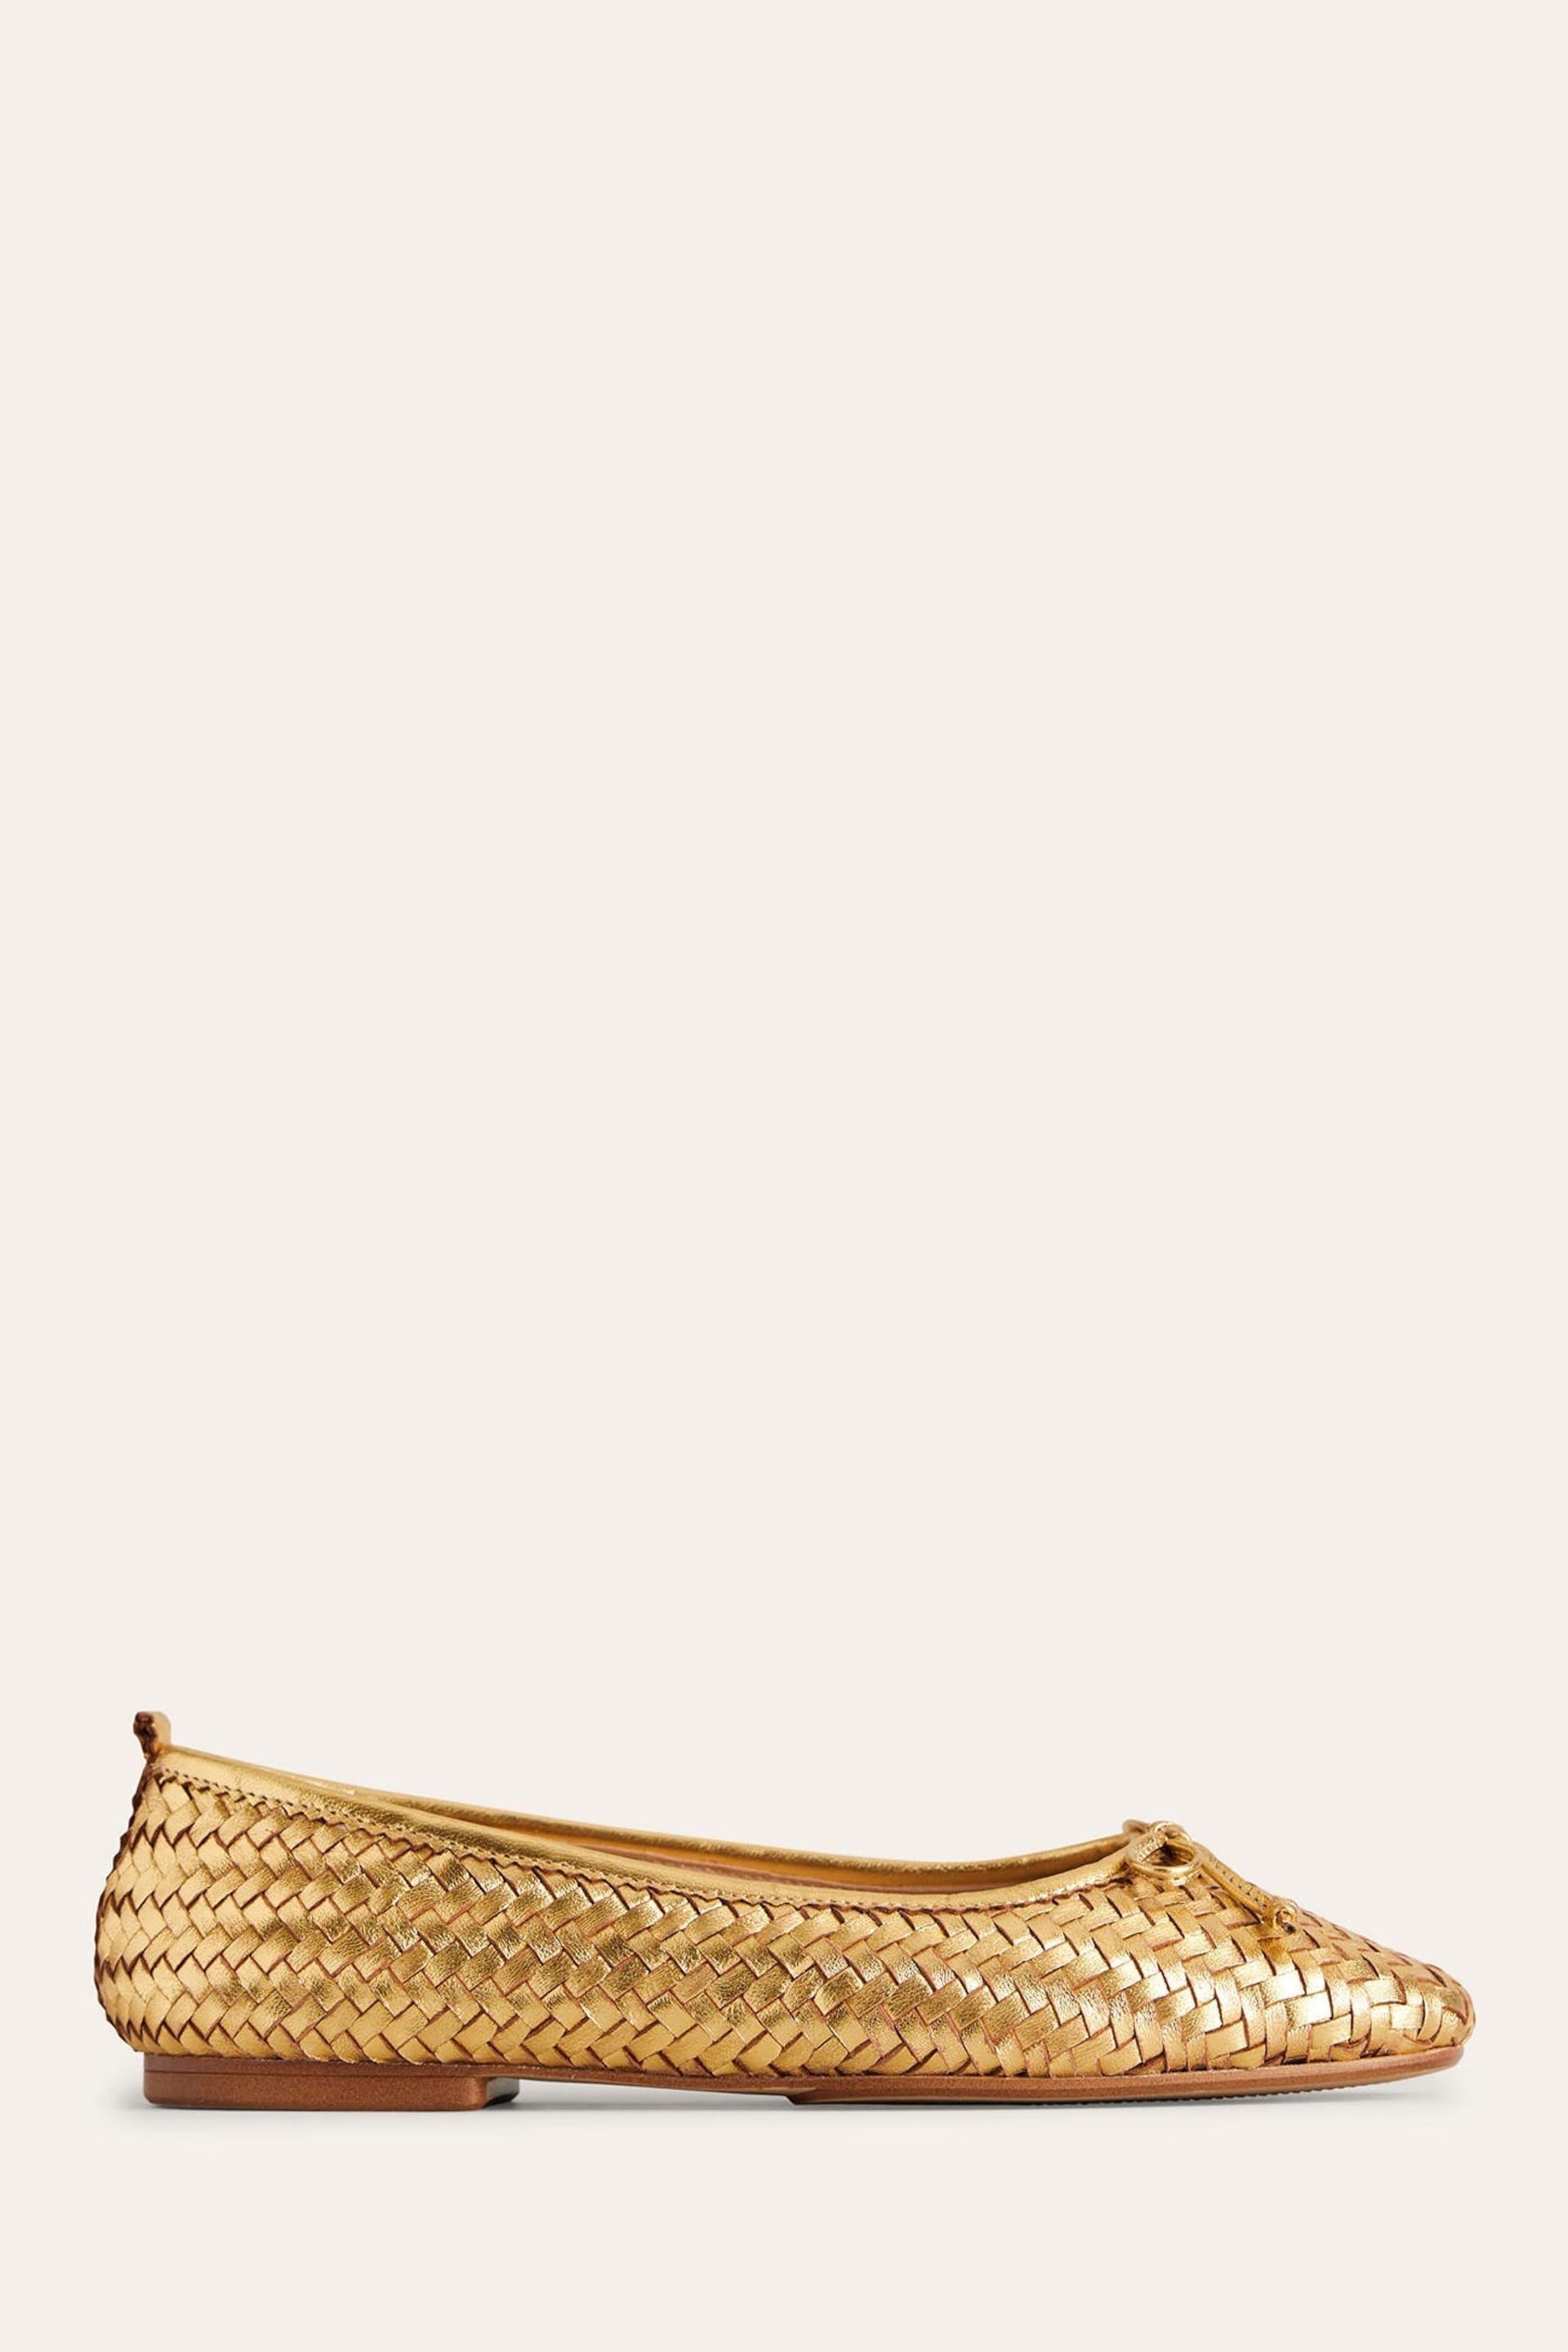 Boden Gold Kitty Flexi Sole Ballet Pumps - Image 2 of 4